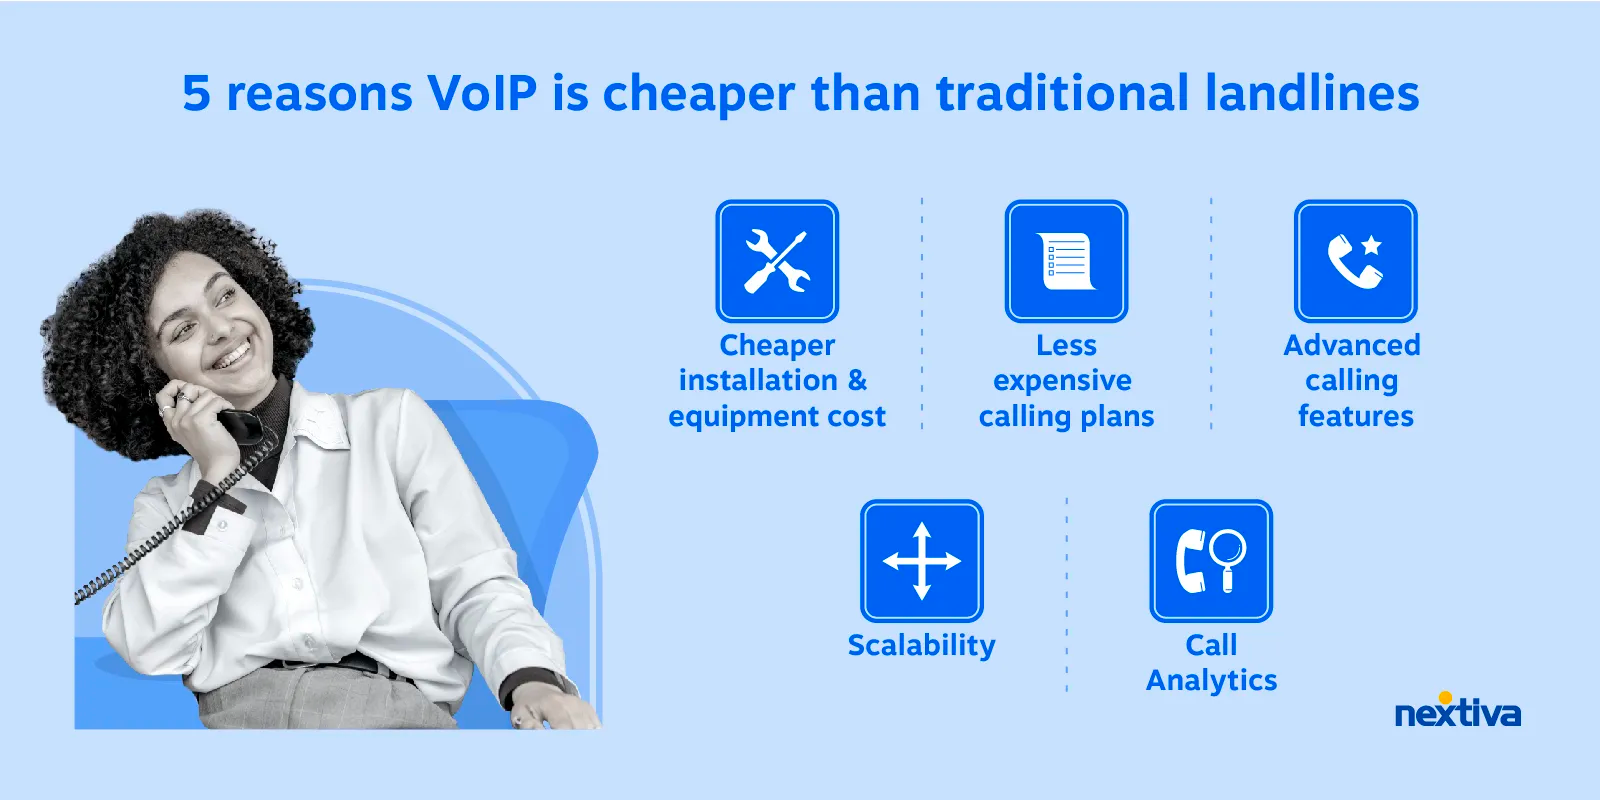 Why VoIP is cheaper than traditional landlines